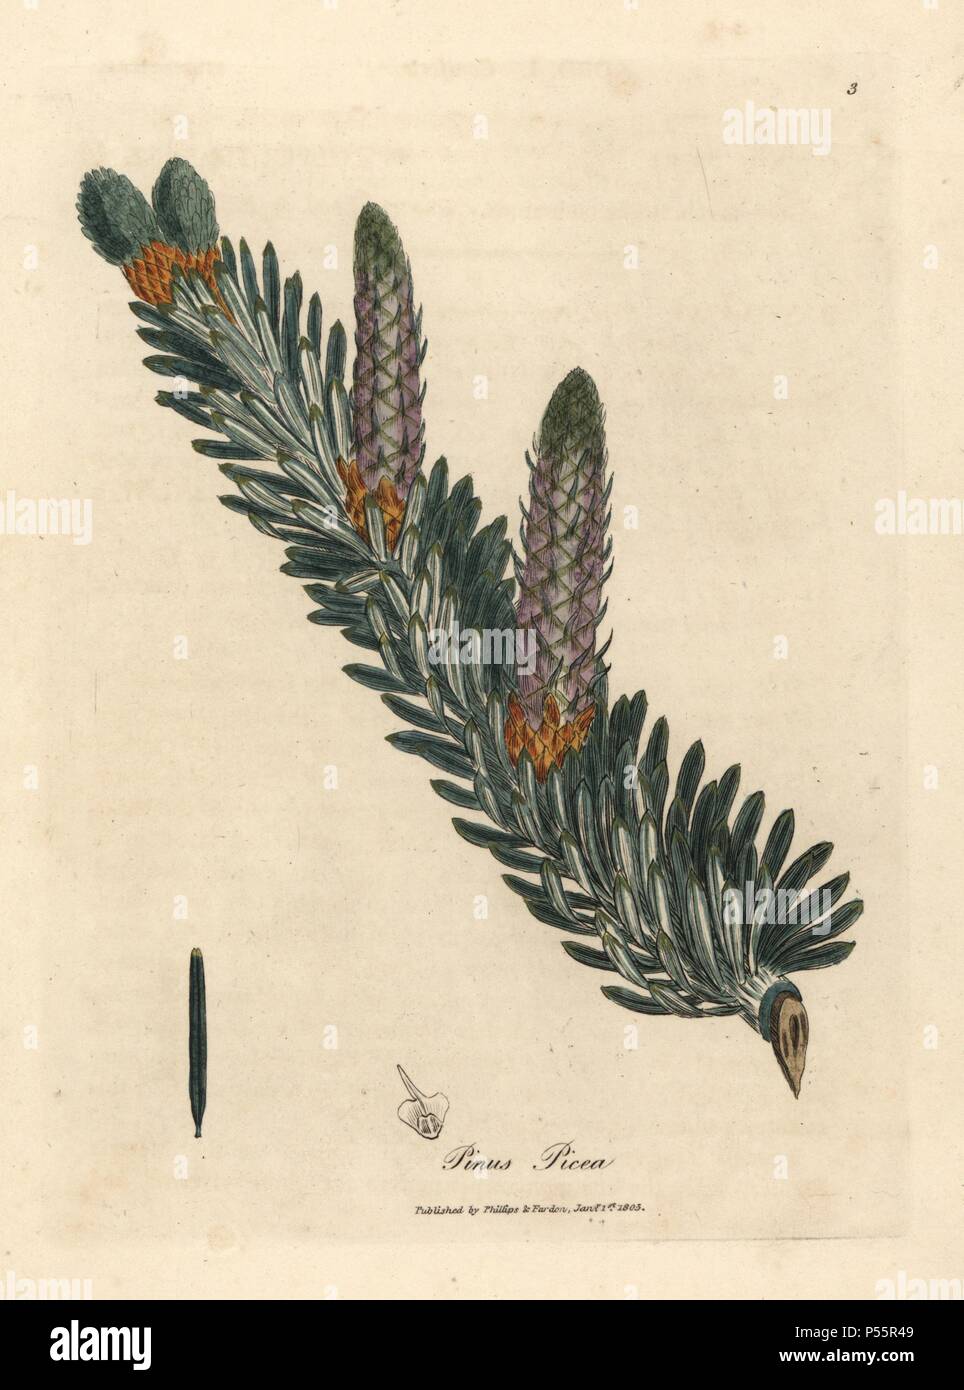 Silver fir tree, Abies alba. Handcoloured copperplate engraving from a botanical illustration by James Sowerby from William Woodville and Sir William Jackson Hooker's 'Medical Botany,' John Bohn, London, 1832. The tireless Sowerby (1757-1822) drew over 2, 500 plants for Smith's mammoth 'English Botany' (1790-1814) and 440 mushrooms for 'Coloured Figures of English Fungi ' (1797) among many other works. Stock Photo